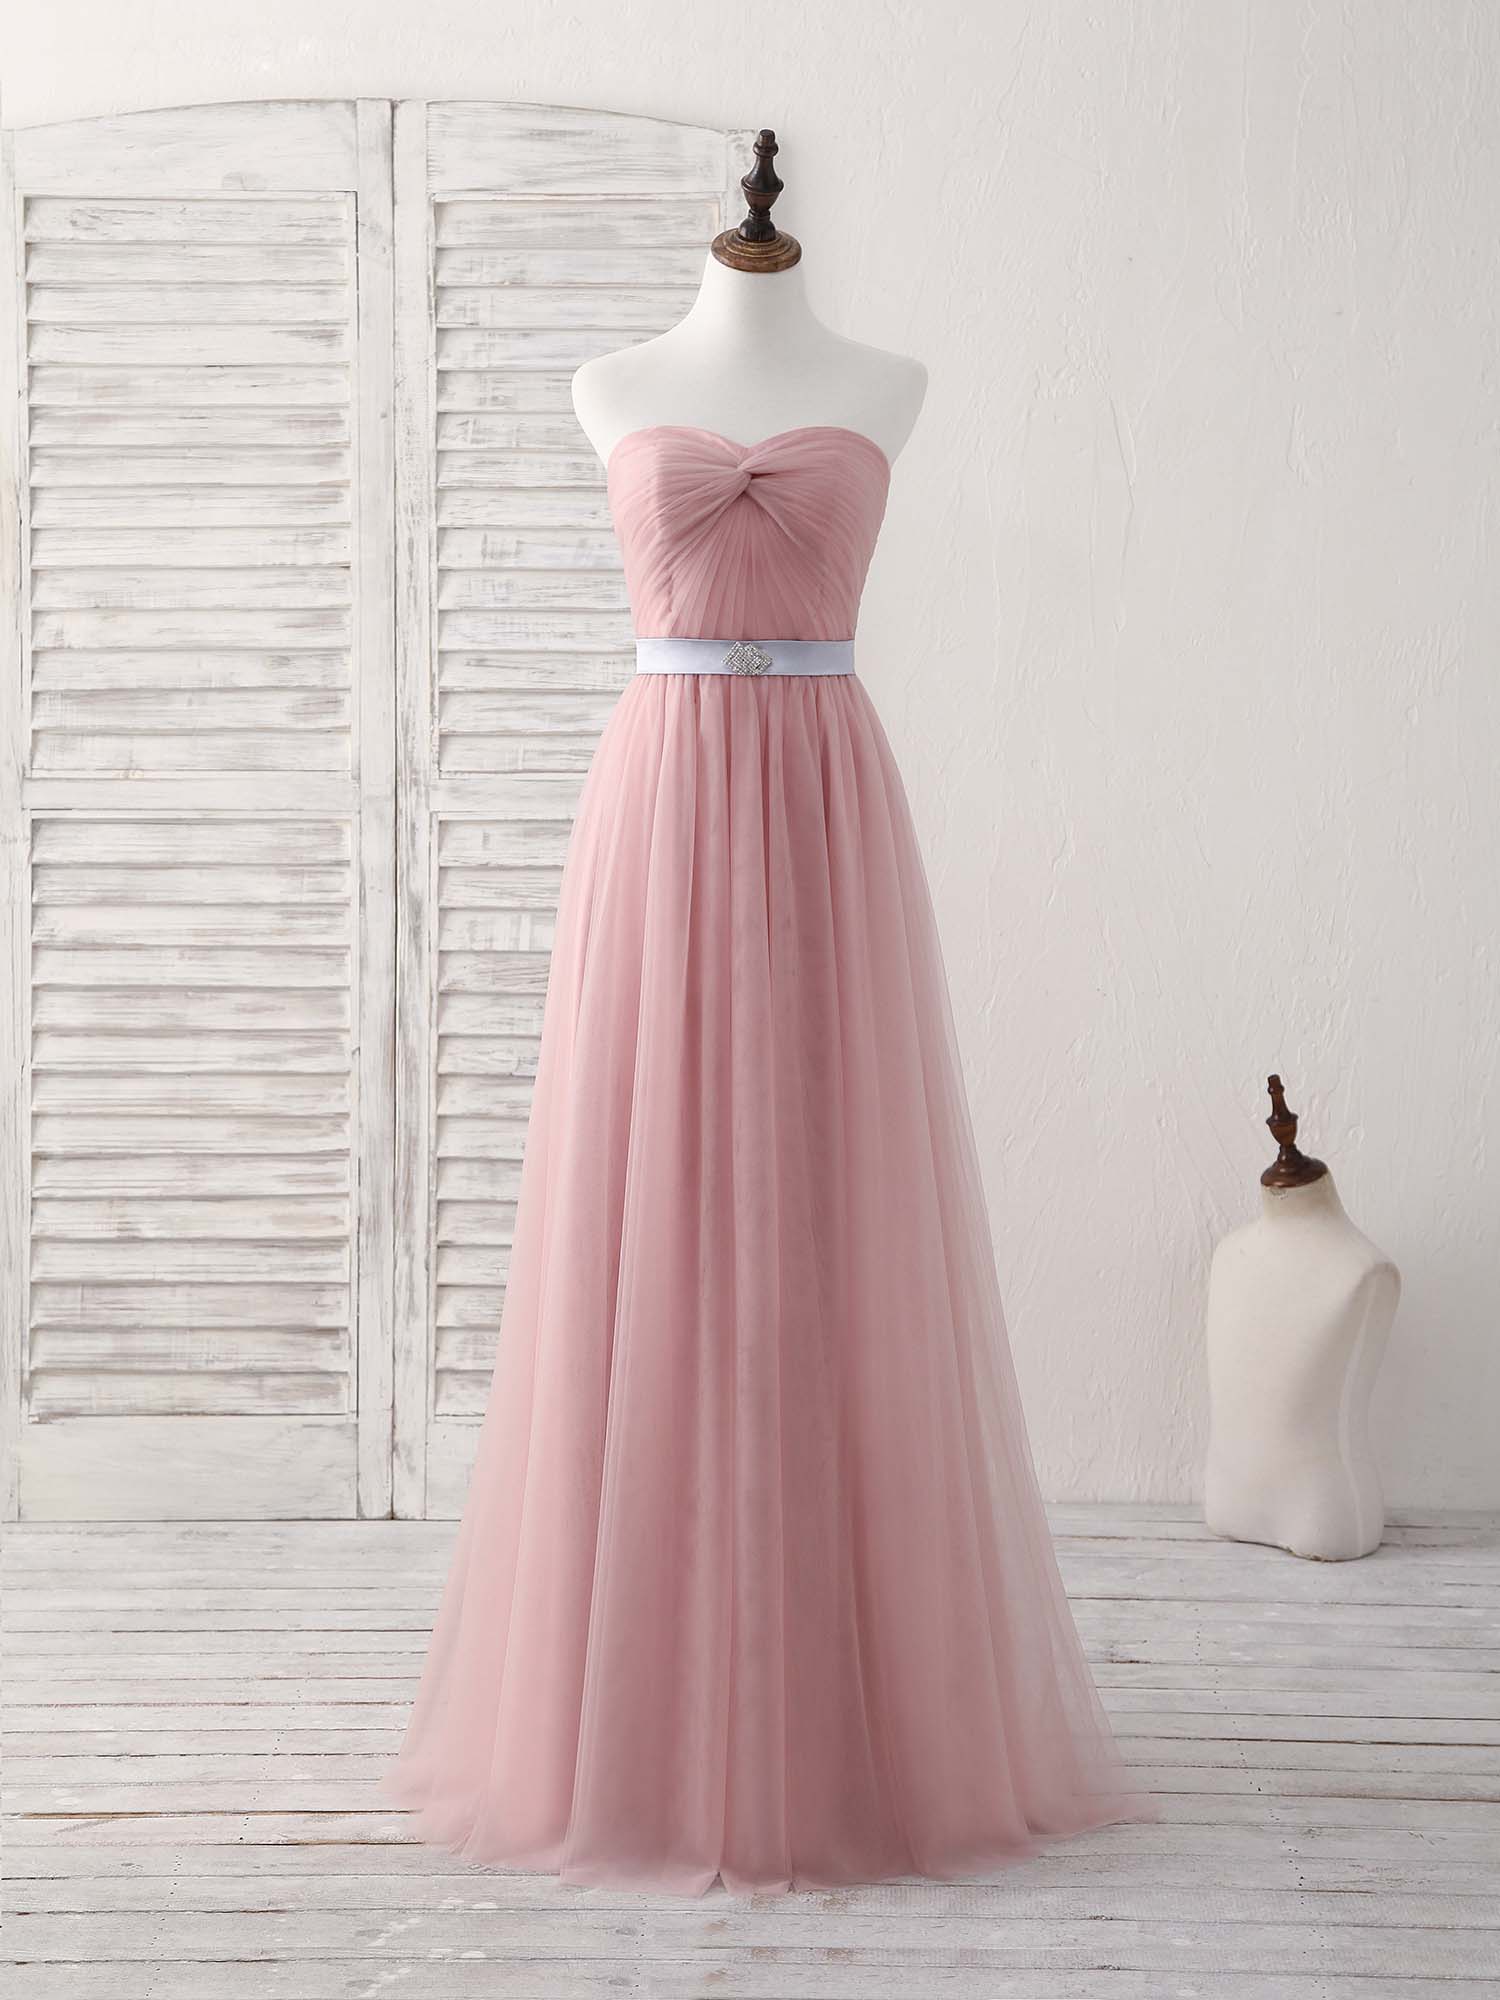 Party Dress Teens, Pink Sweetheart Neck Tulle Long Prom Dress, Aline Pink Bridesmaid Dress